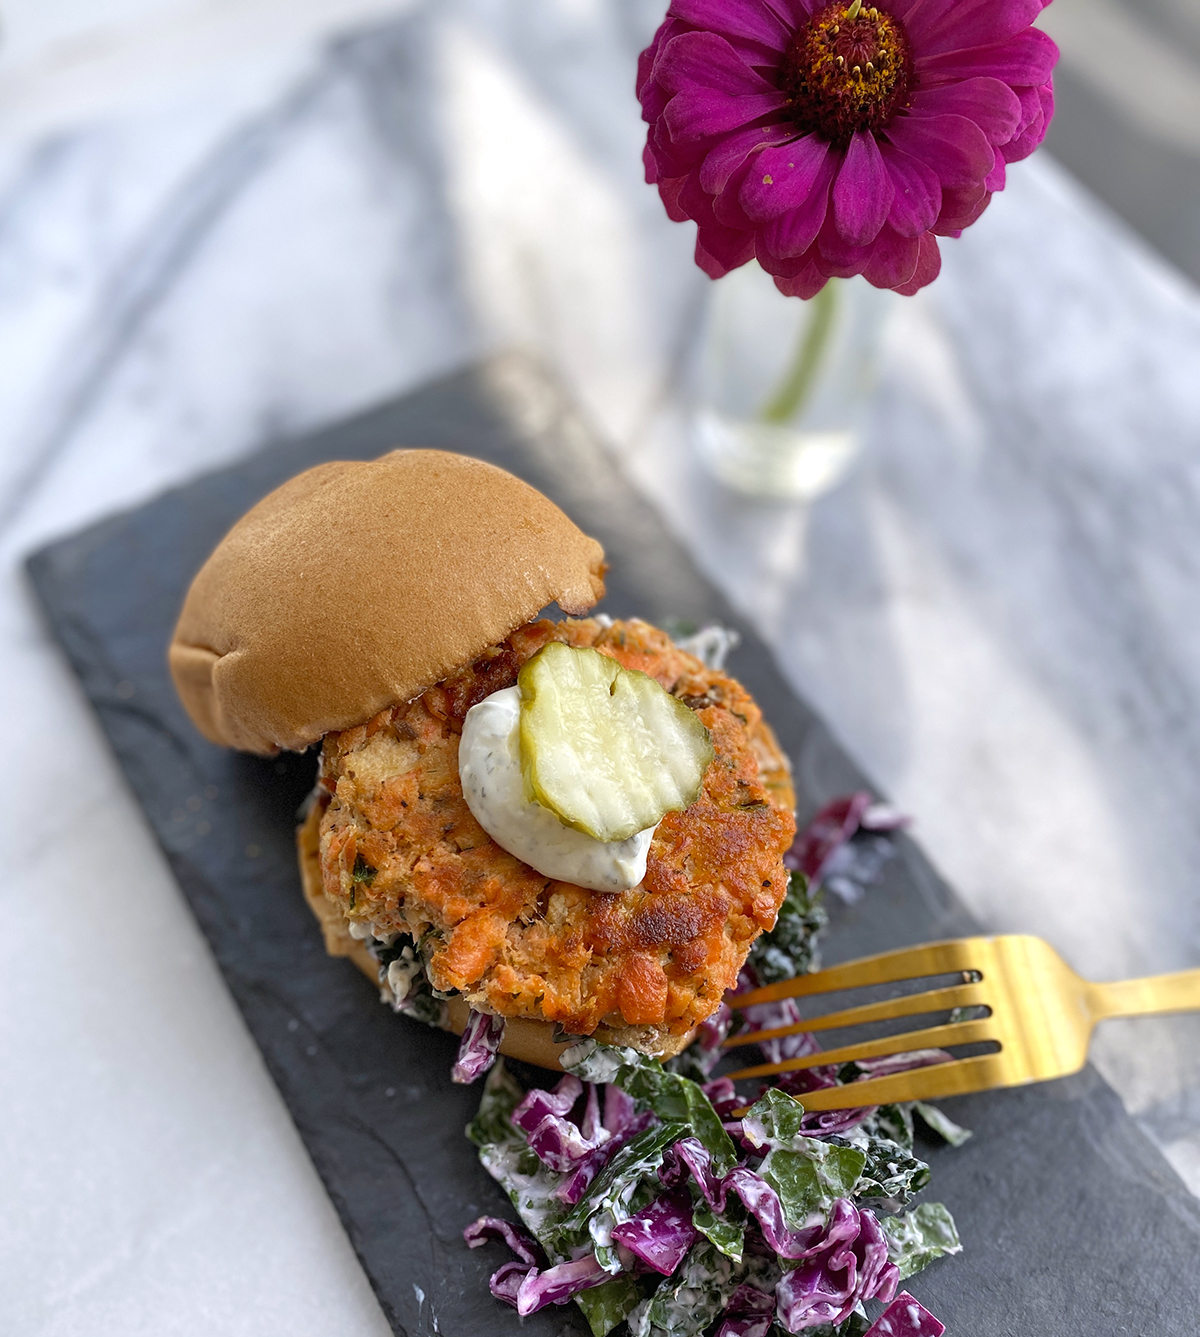 Gluten-free salmon cake in a bun with yogurt dip, pickle, red cabbage slaw, on a black plate and magenta colored Zinnia in a small glass vase. 